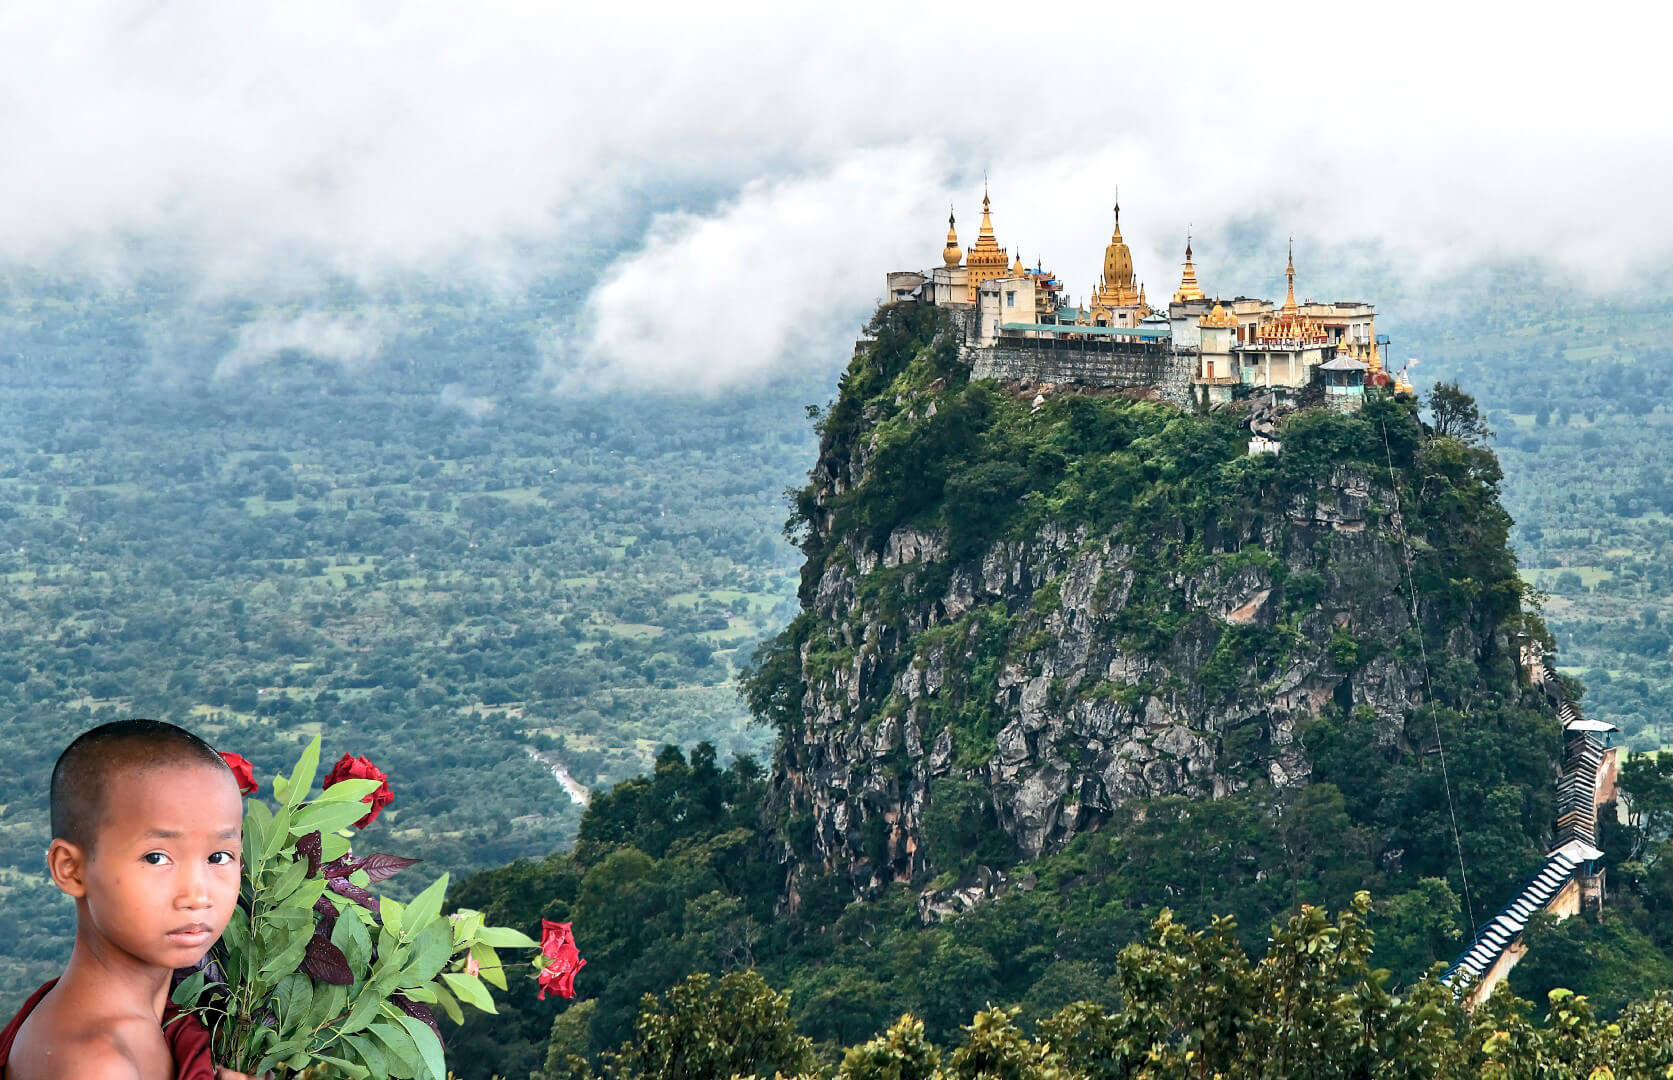 A breathtaking view of Mount Popa with lush green forests.